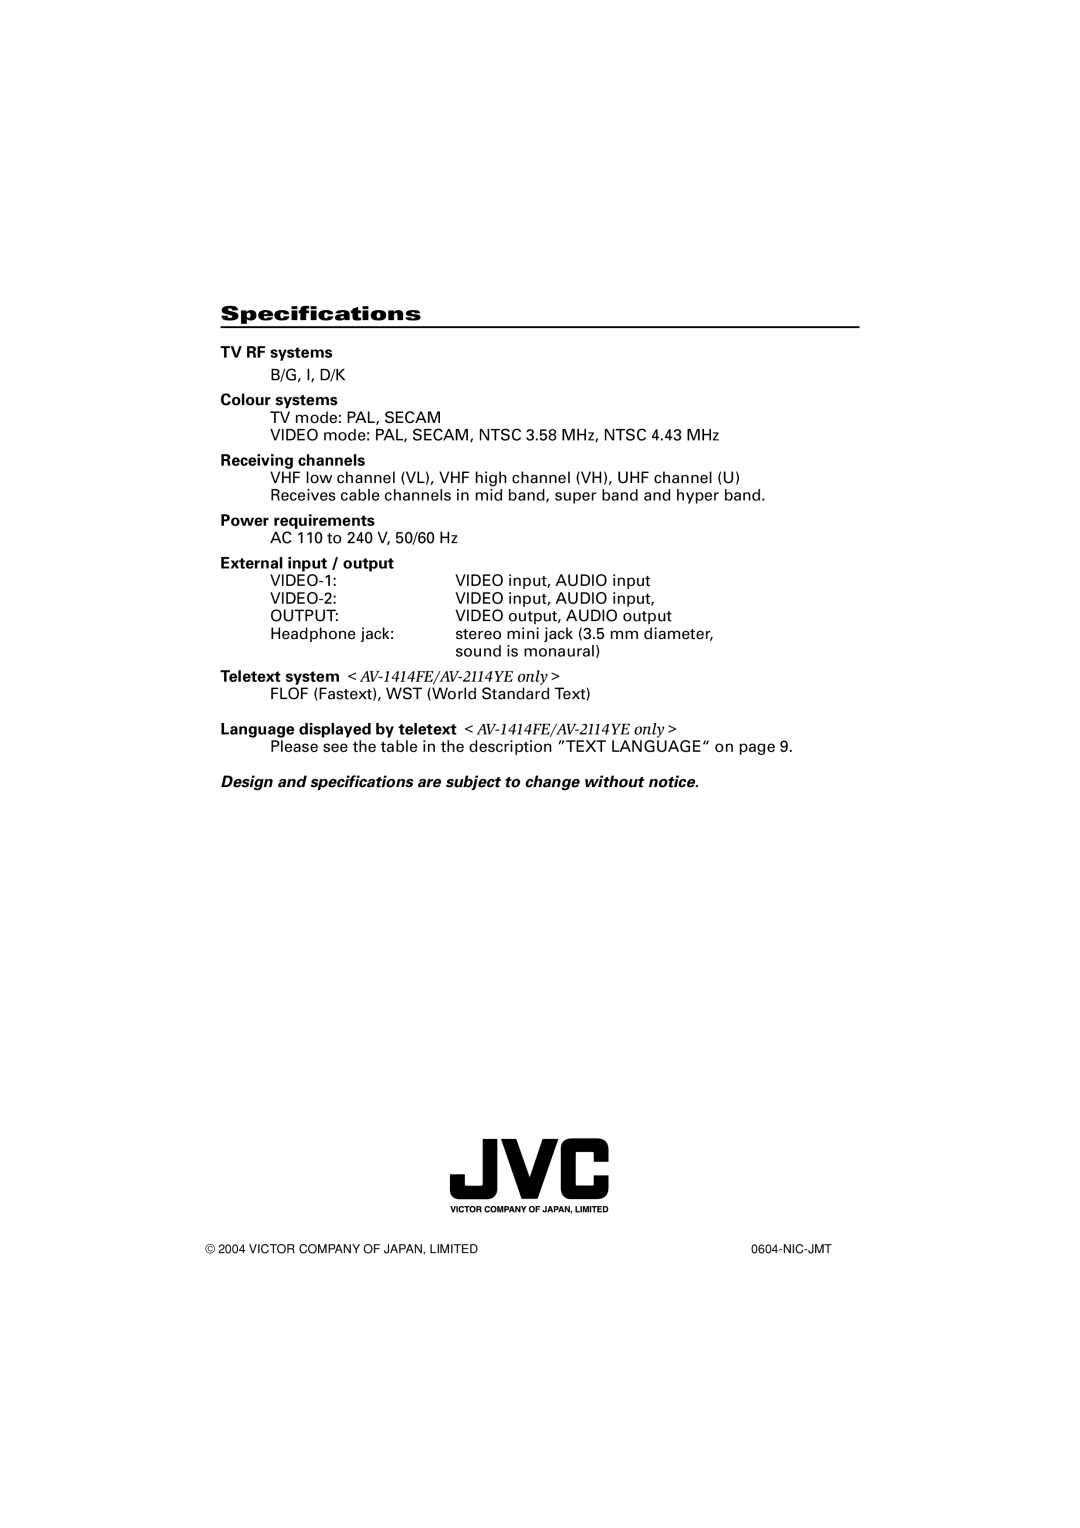 JVC Specifications, TV RF systems, Colour systems, Receiving channels, Power requirements, External input / output 